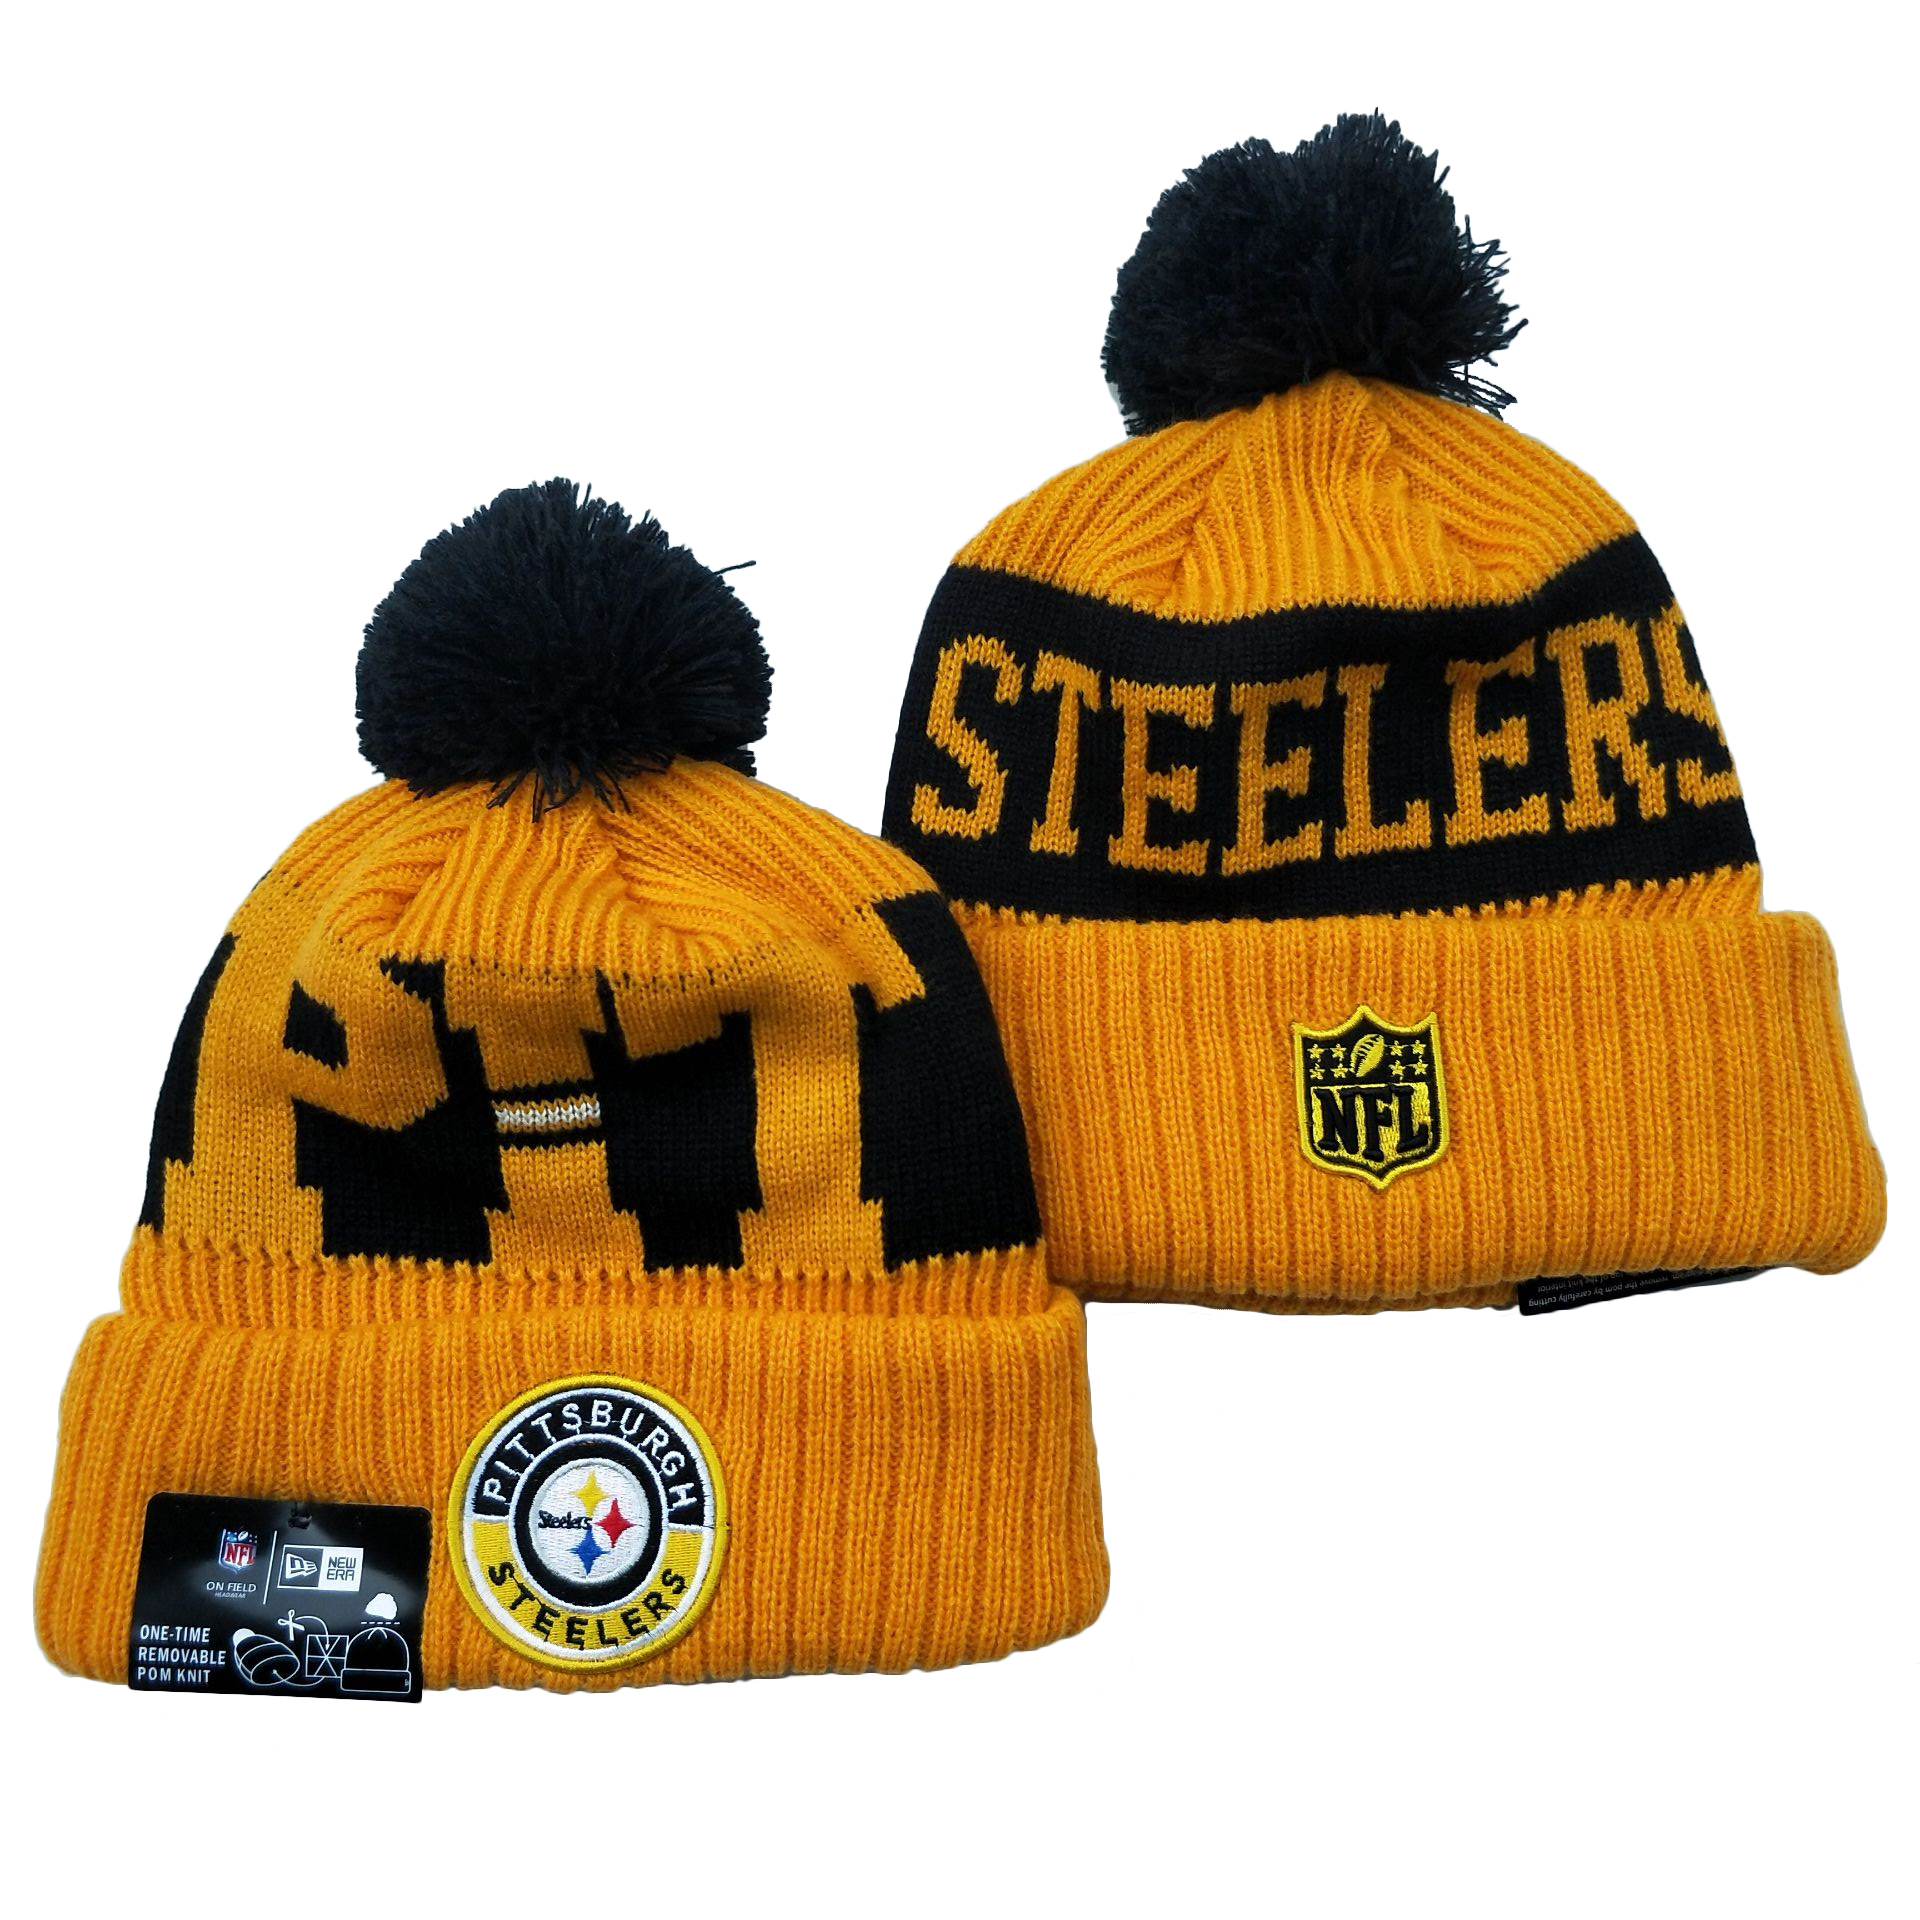 Pittsburgh Steelers Knit Hats 073